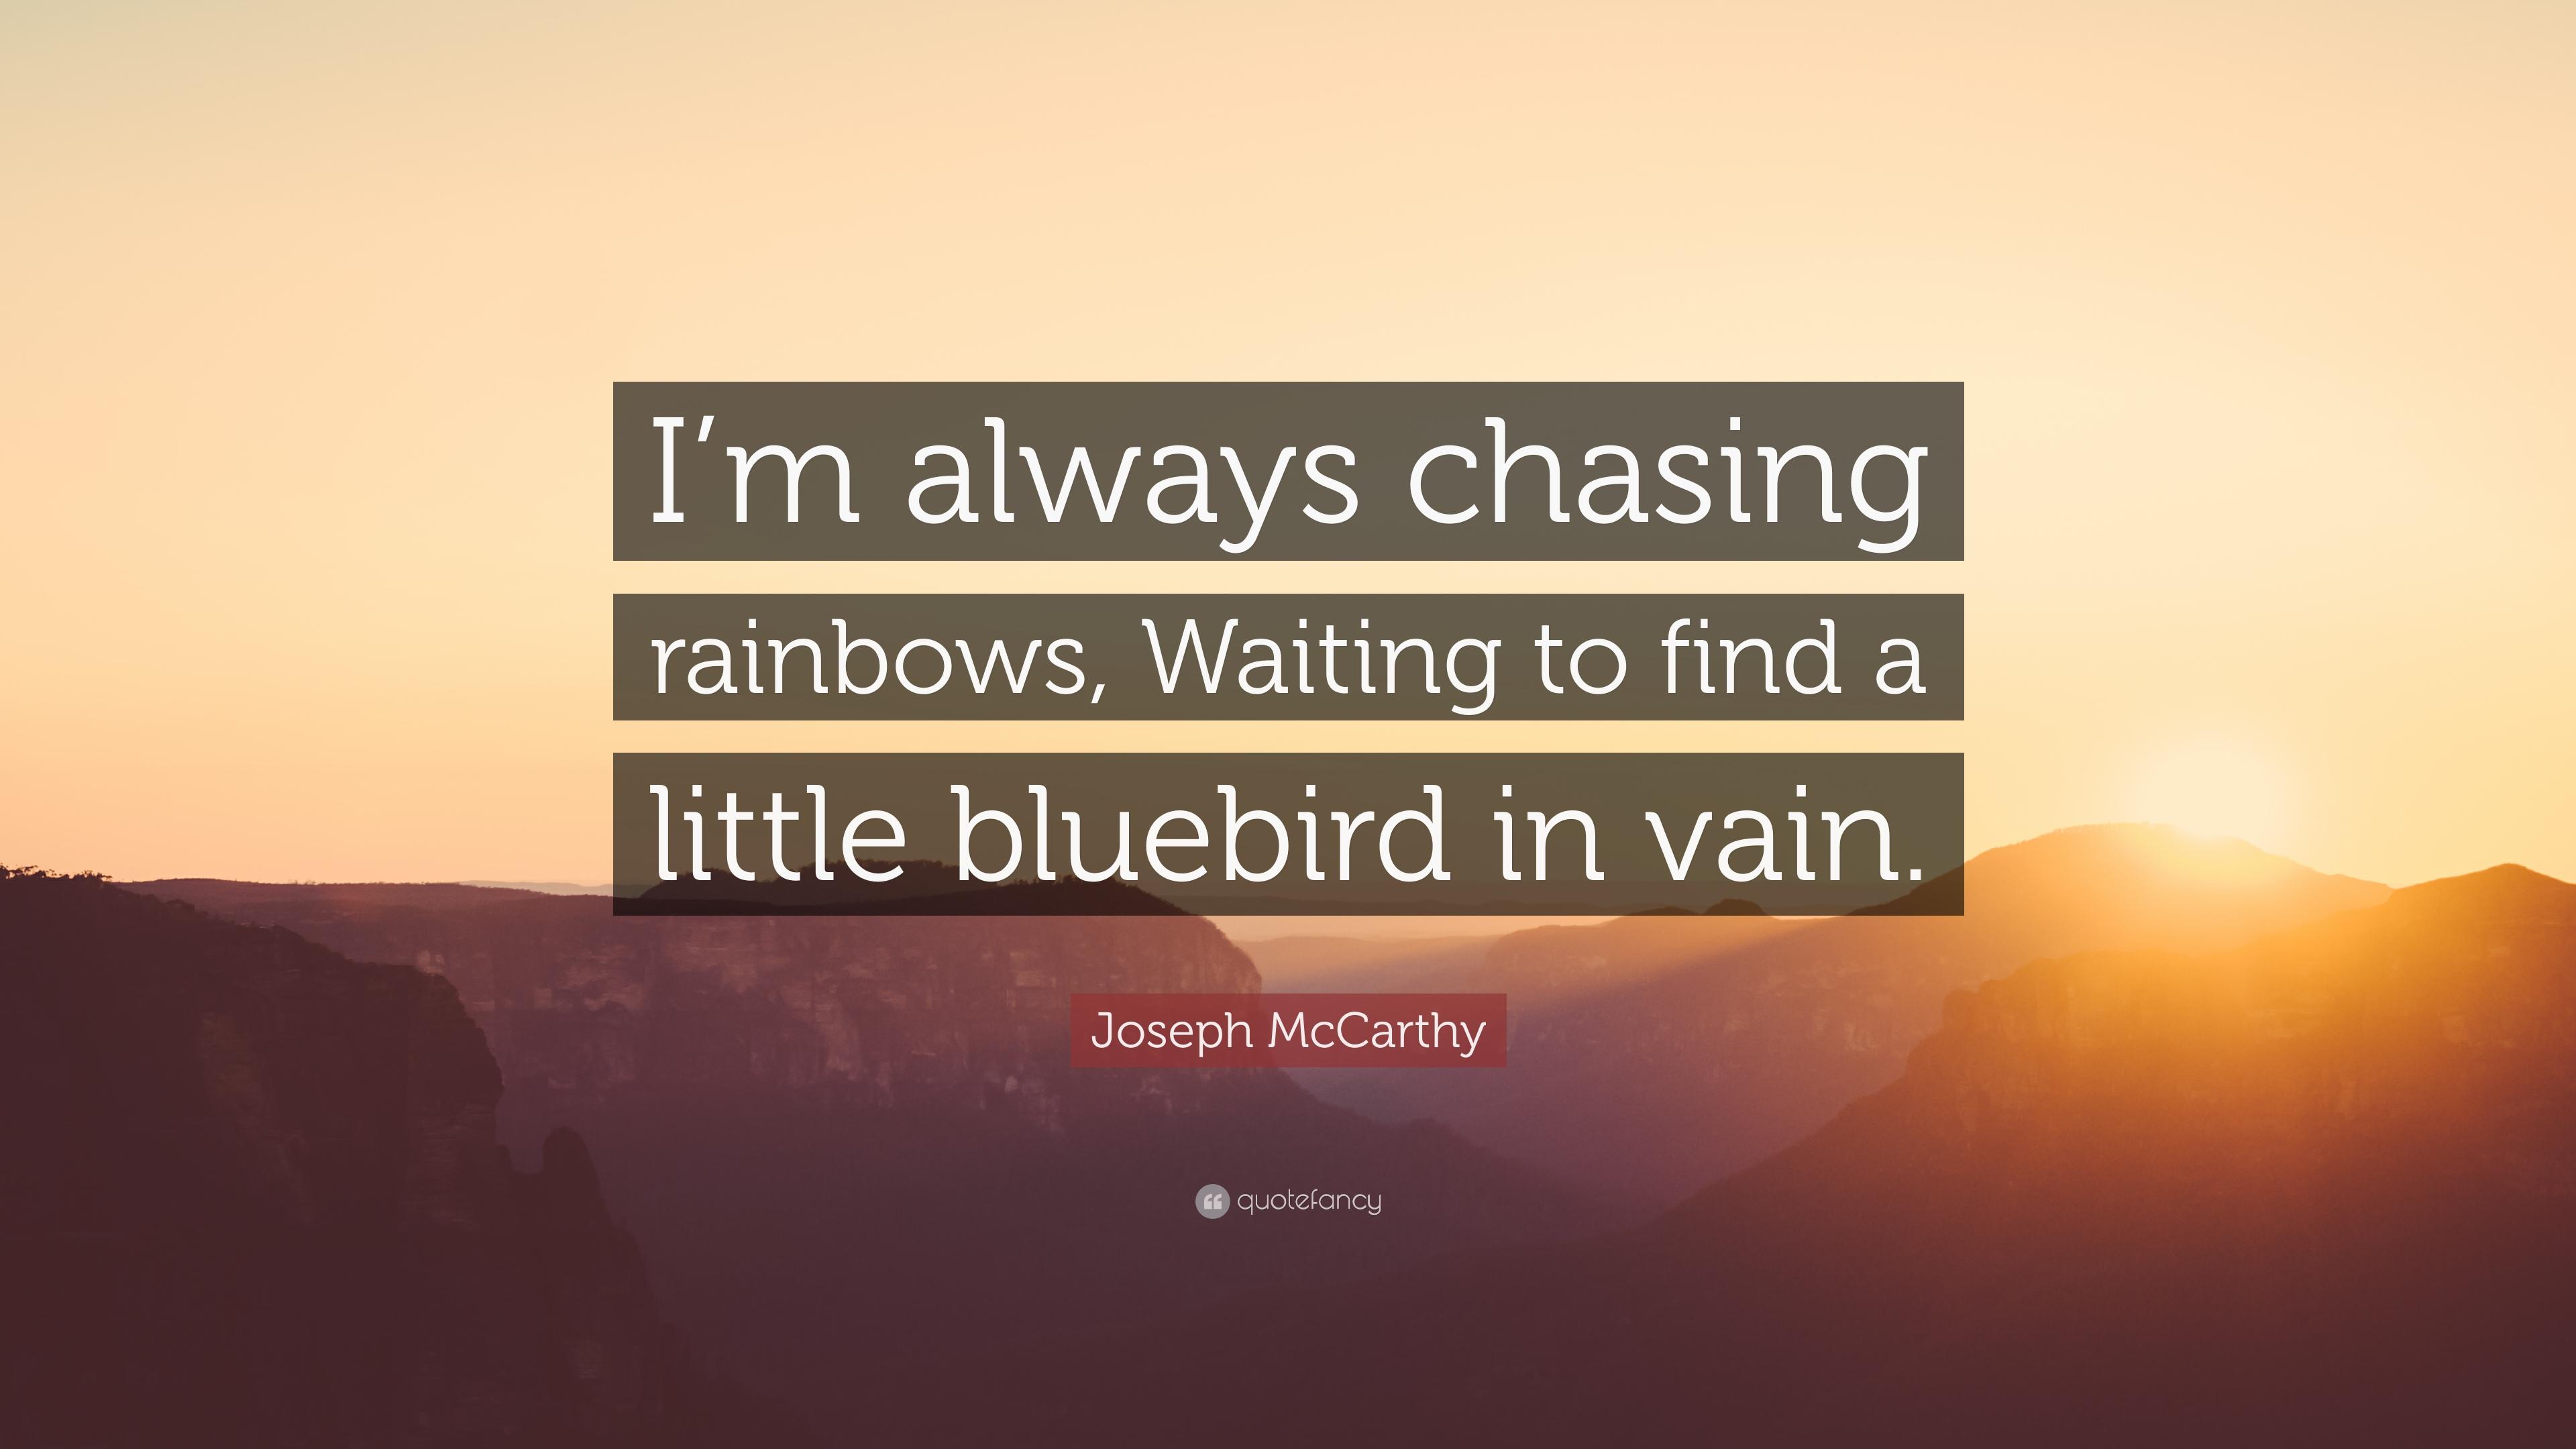 Joseph McCarthy Quote: “I'm always chasing rainbows, Waiting to find